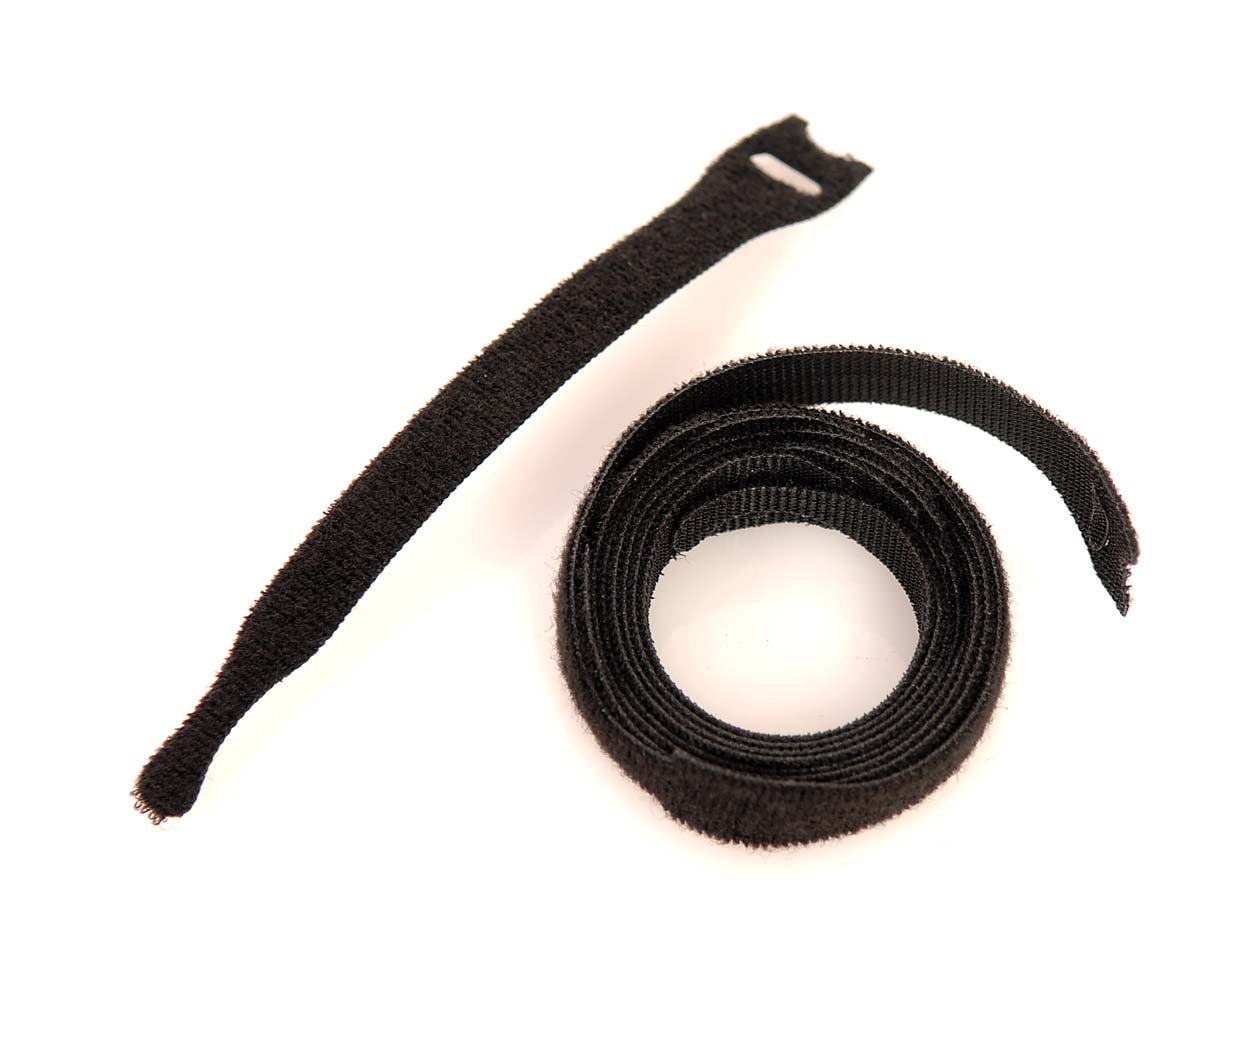  VELCRO® Brand One-Wrap Cable Tie Roll 900 Pack Black